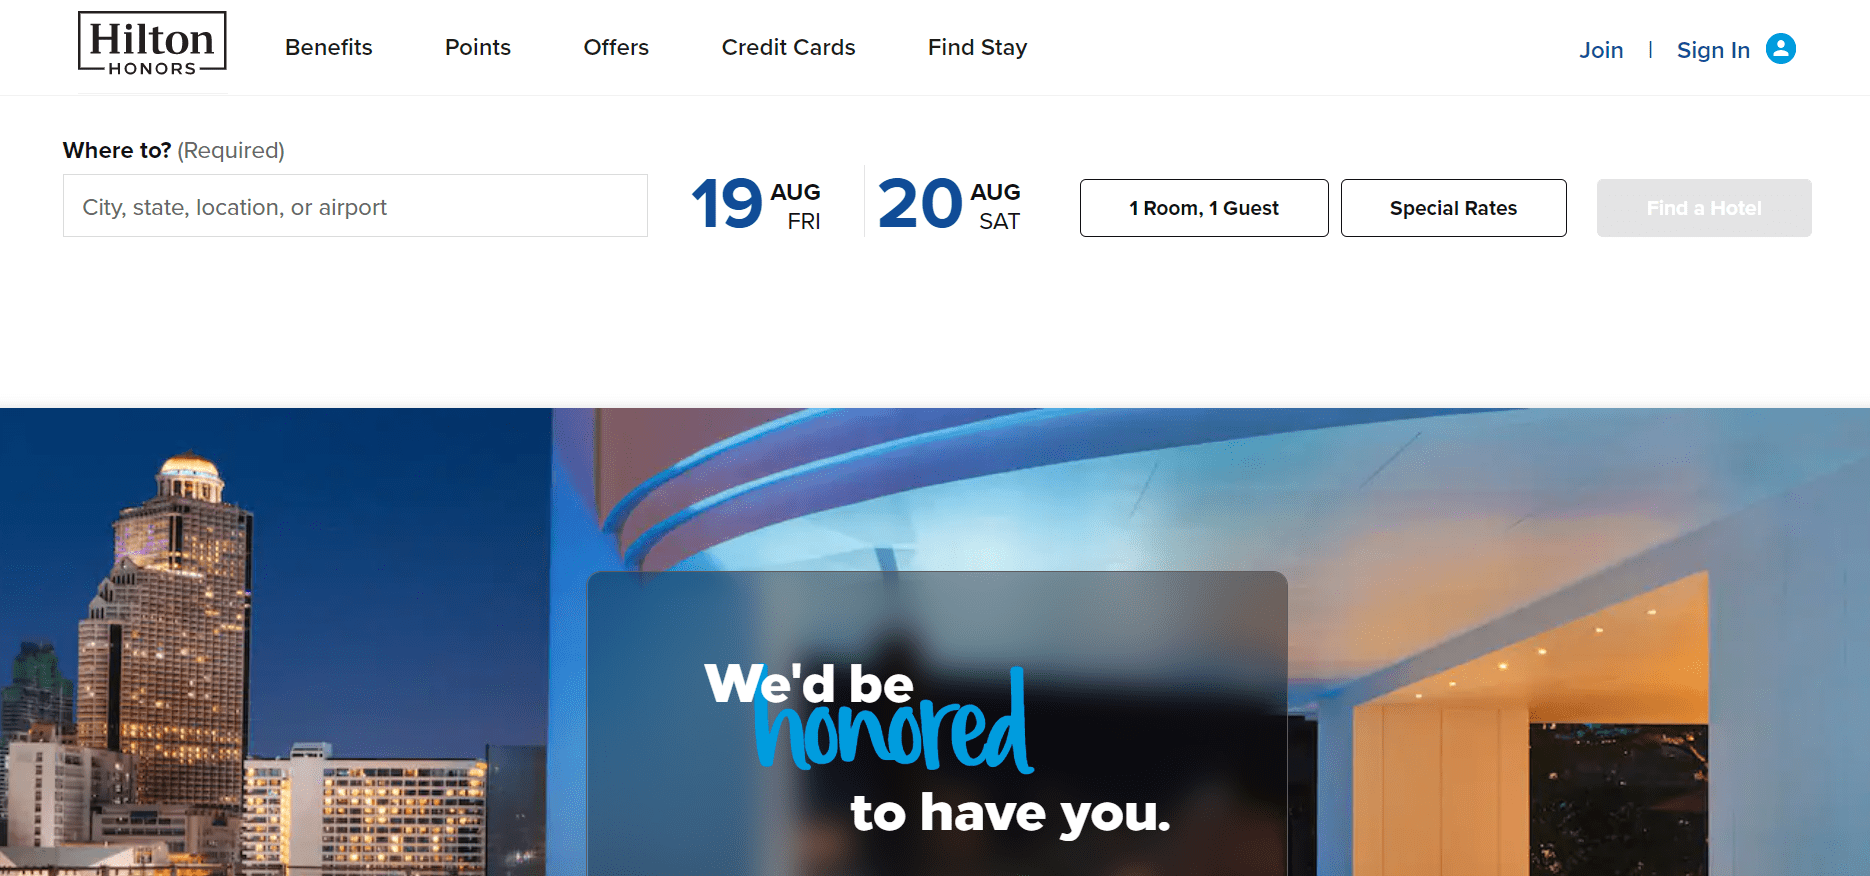 How To Connect To Hilton Honors Wifi? Bizzield